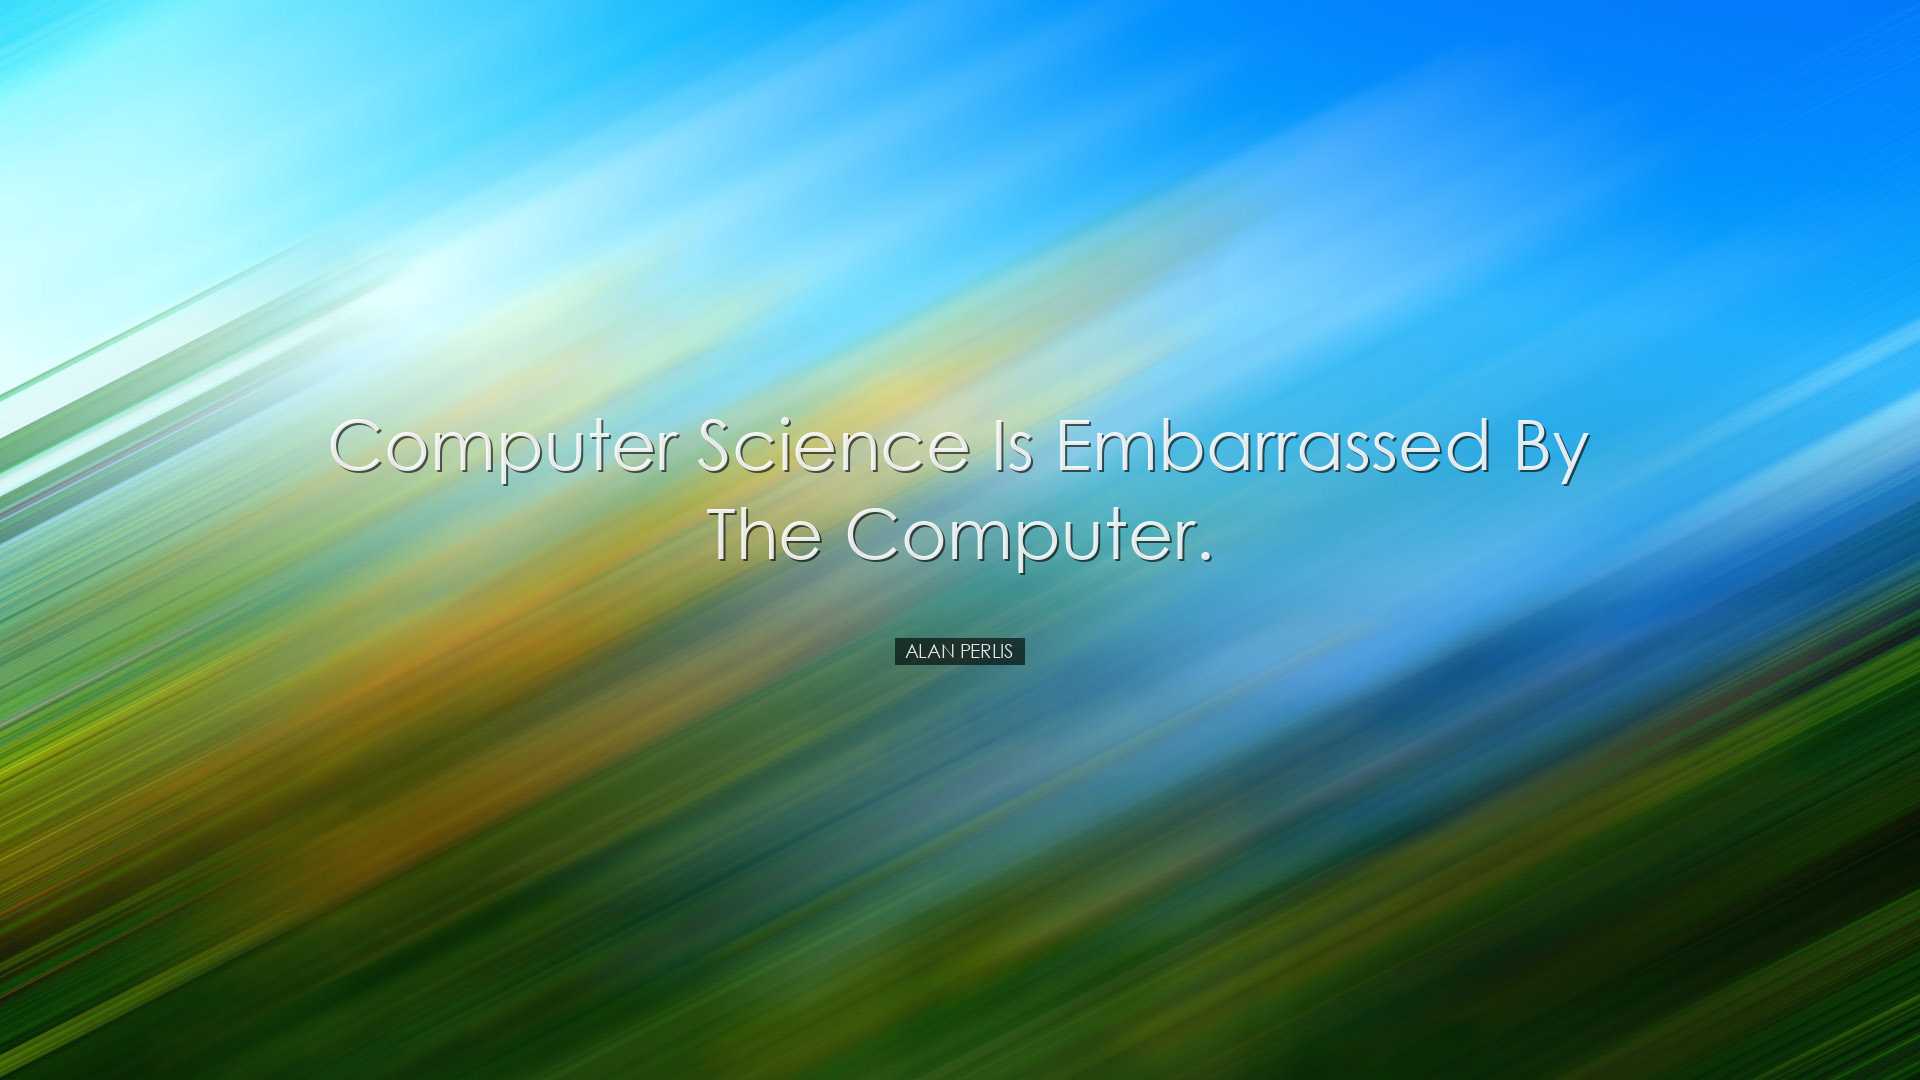 Computer Science is embarrassed by the computer. - Alan Perlis